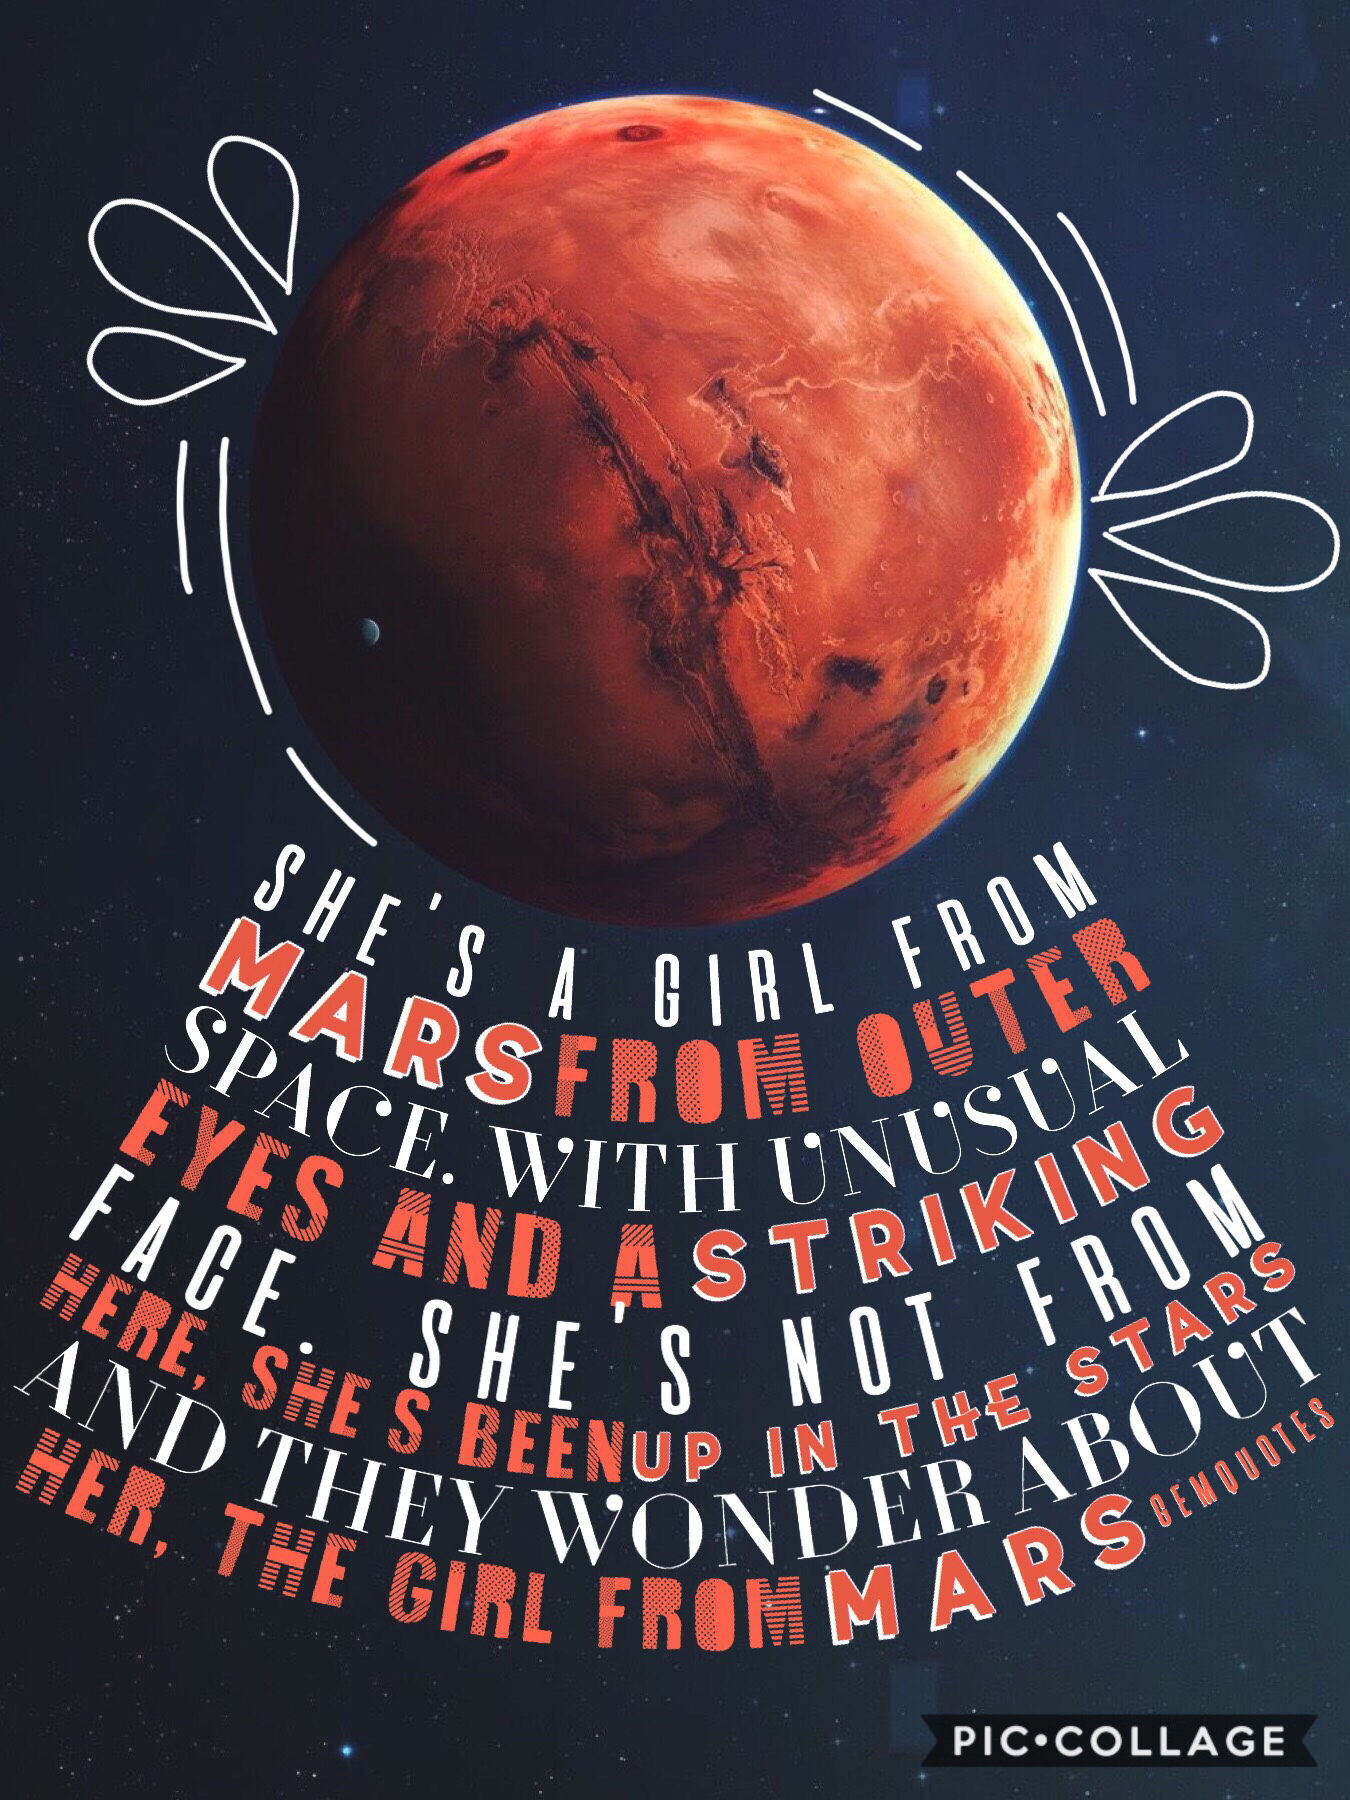 “⭐️tap⭐️”
A mars-tastic edit for you guys! Please excuse that last sentence, I promise ti never say mars-tastic again😂😂 Poem by me :) hoping you guys are having a chill weekend and you’re relaxing! Sending some spaced out vibes and love~💫🌌❤️💕